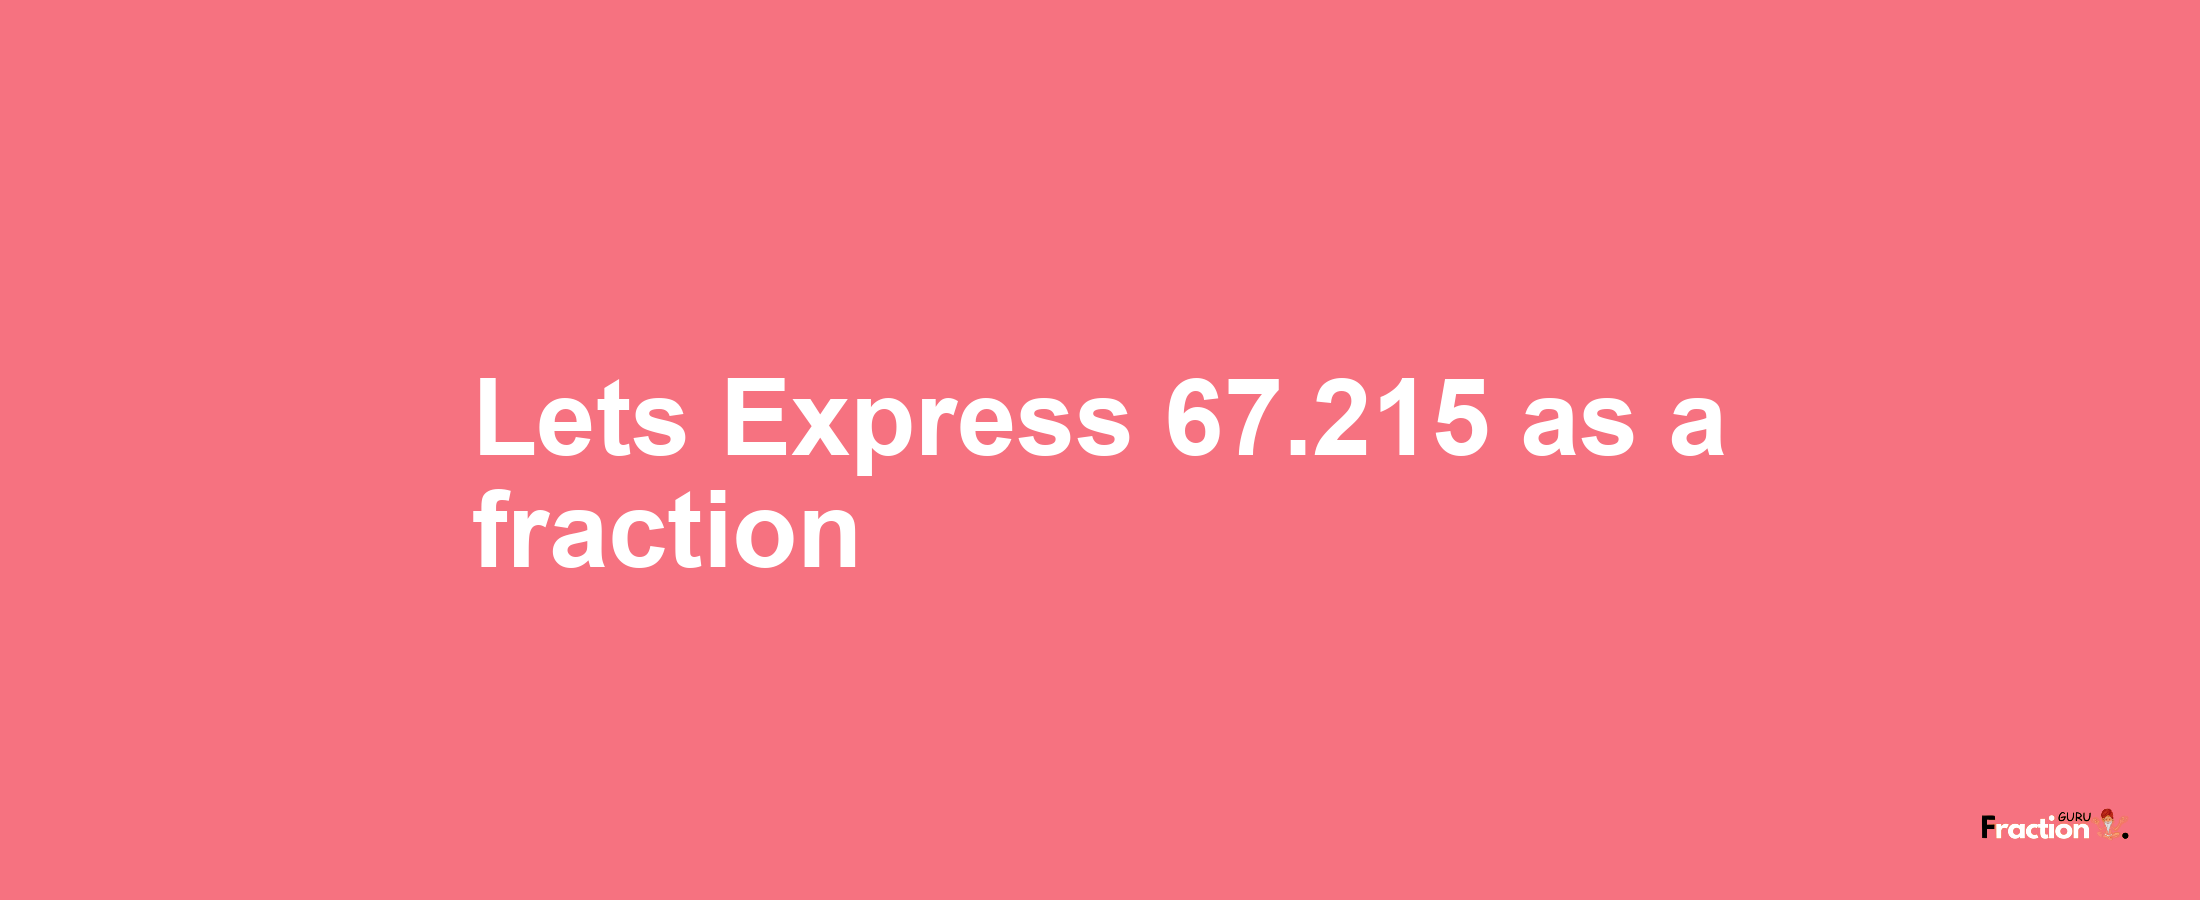 Lets Express 67.215 as afraction